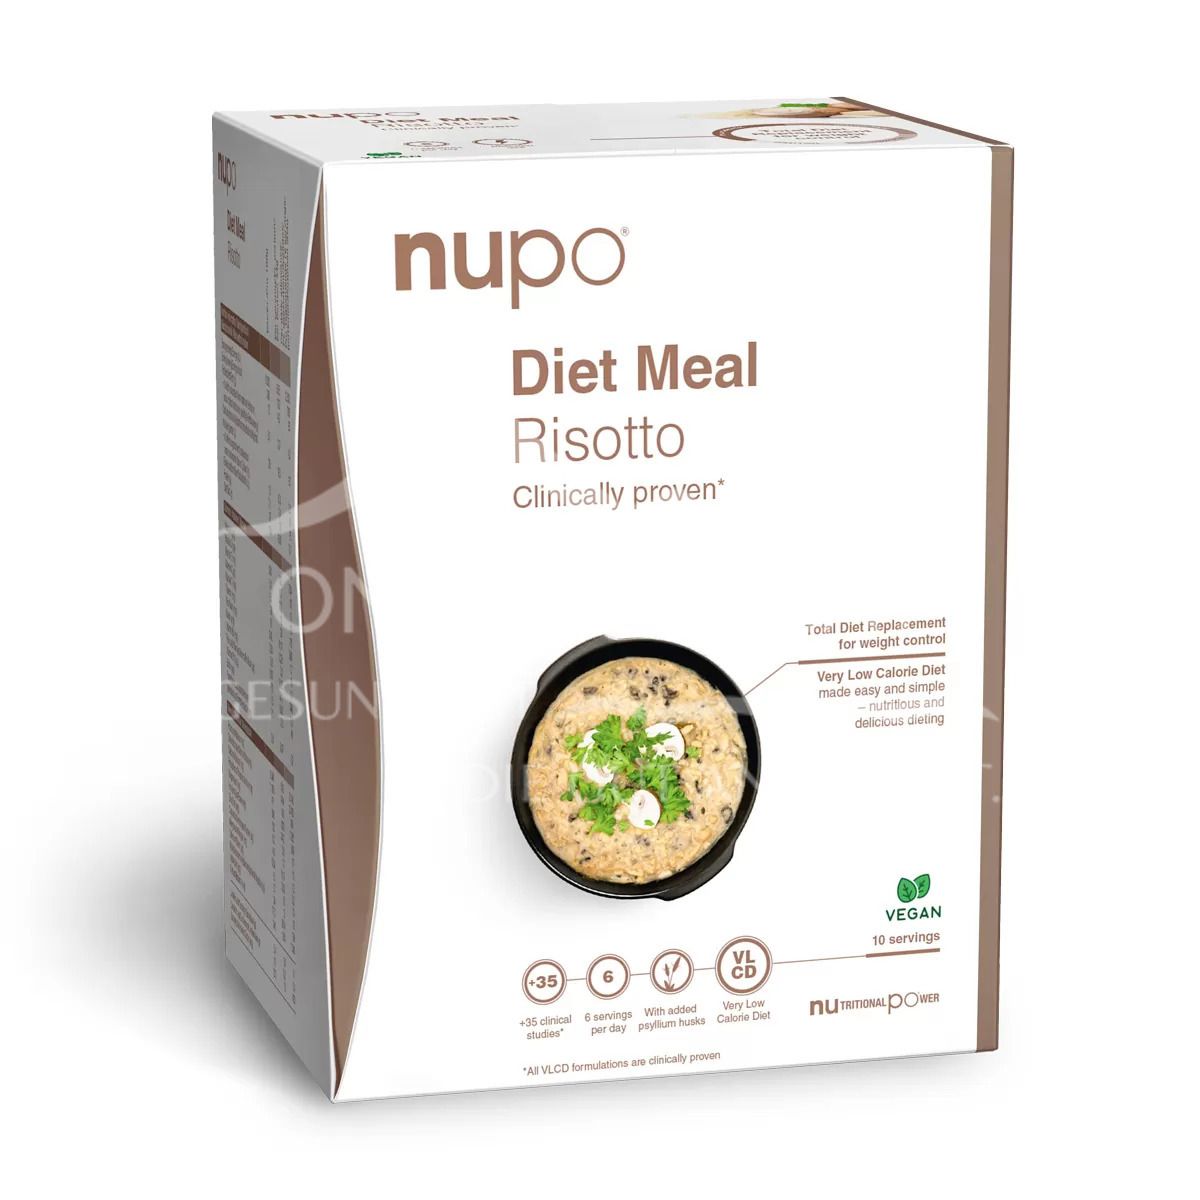 Nupo Diet Meal Risotto